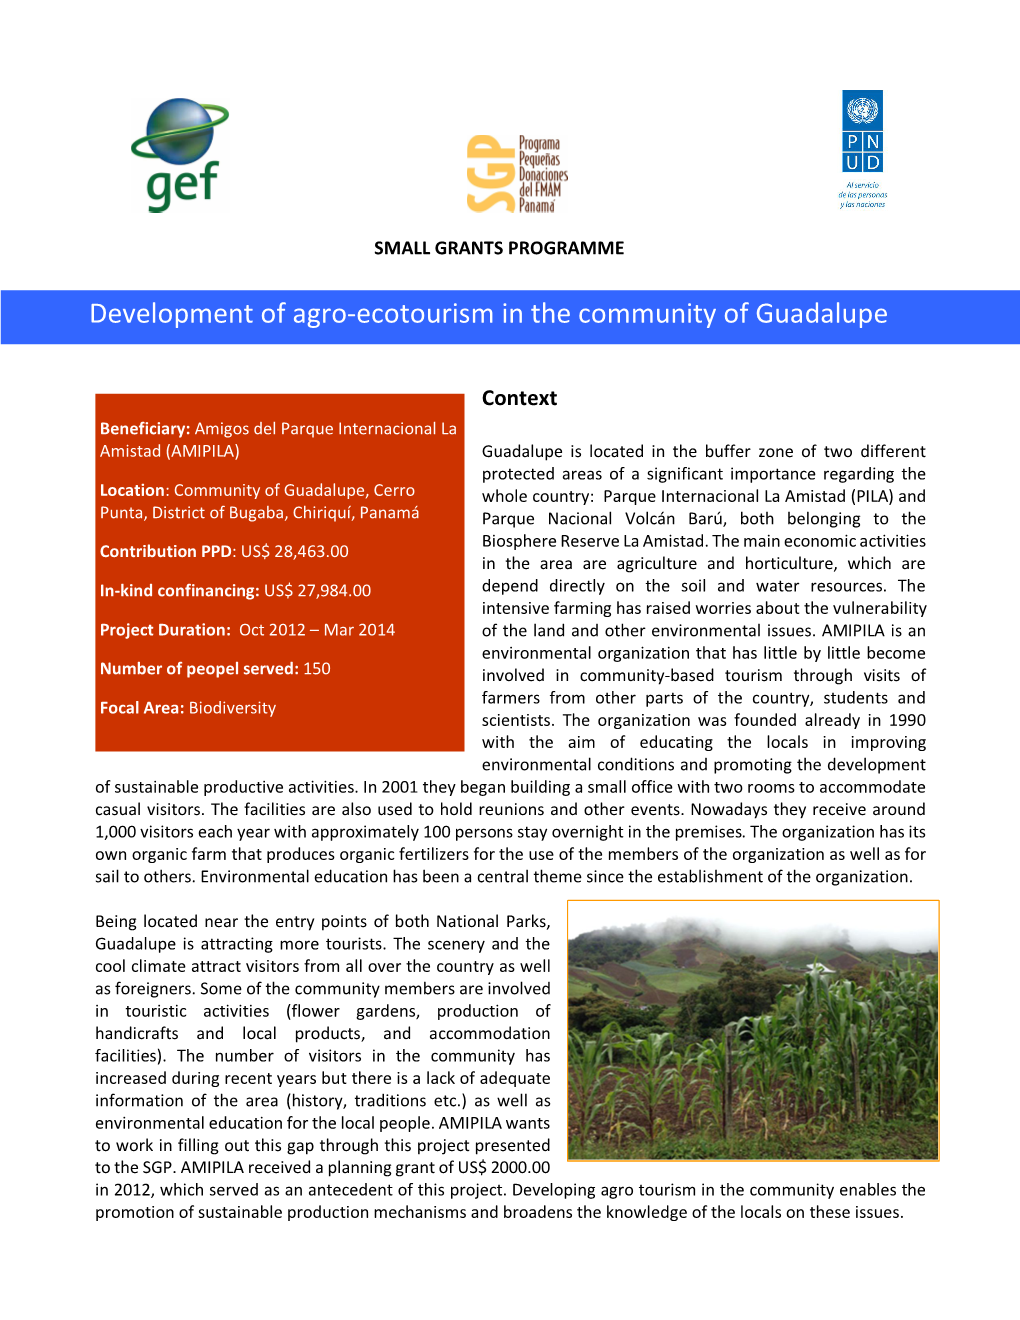 Development of Agro-Ecotourism in the Community of Guadalupe